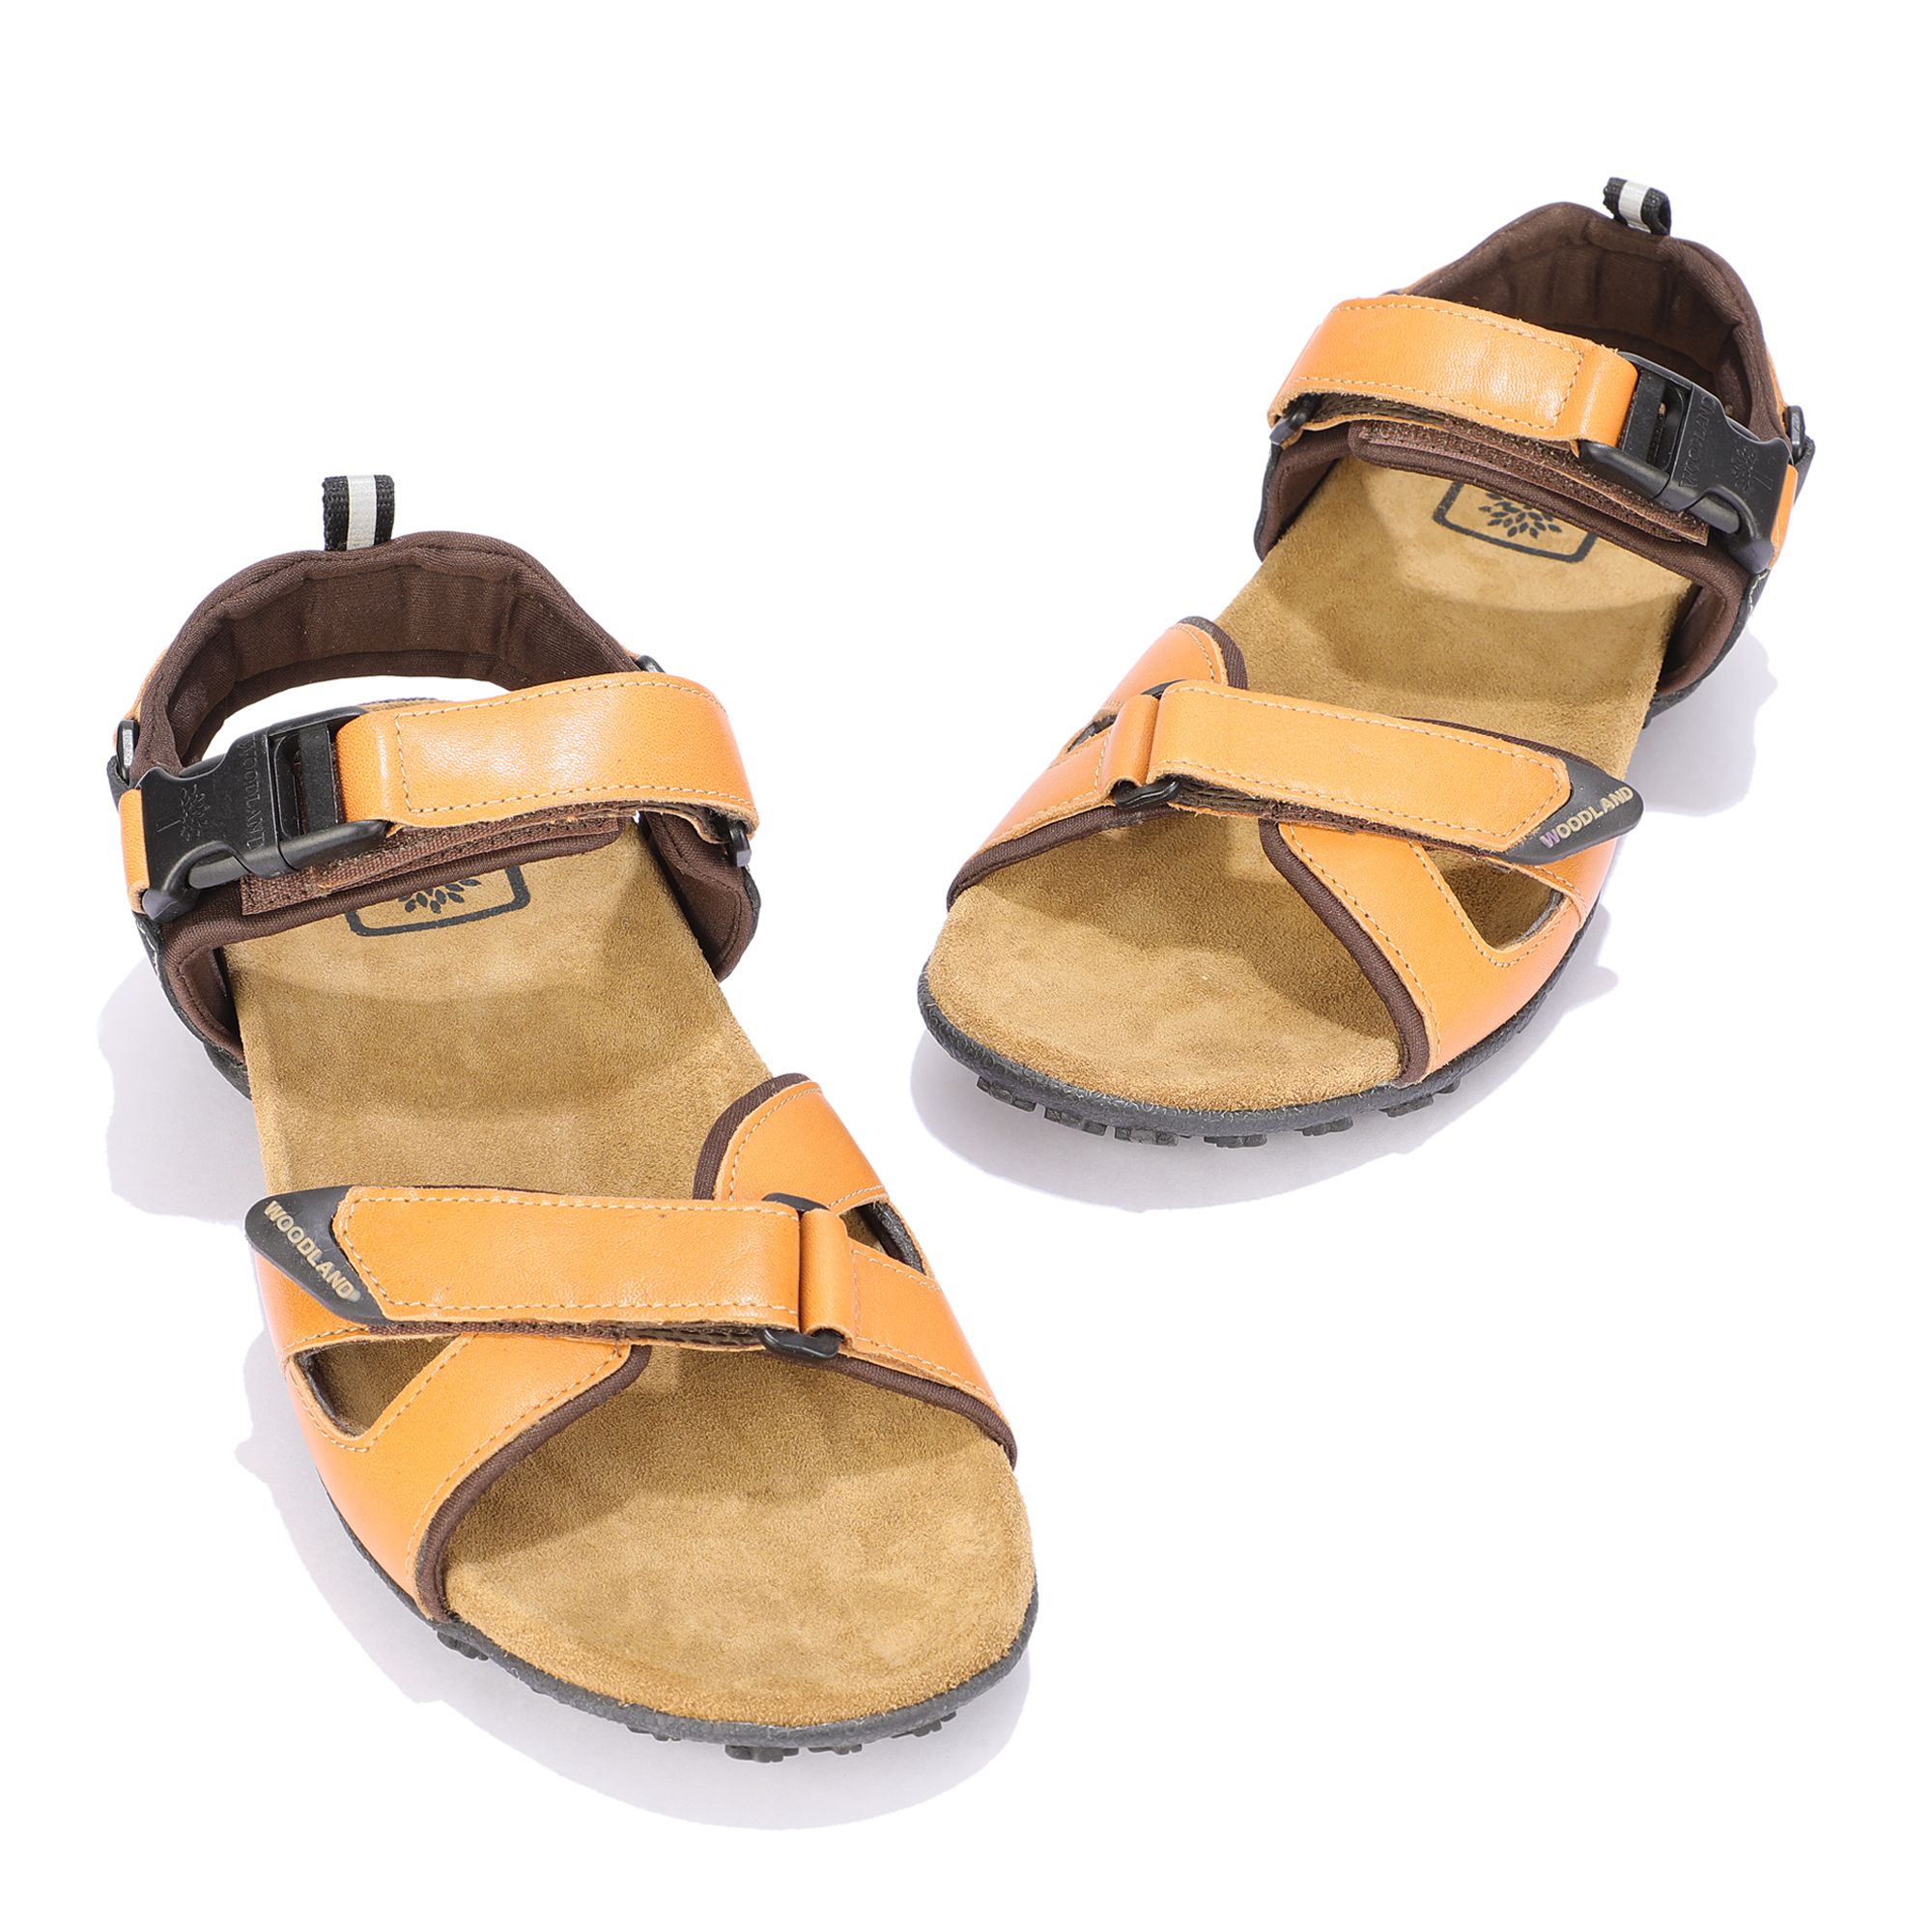 Woodland Women Sandal in Warangal at best price by Woodland Store - Justdial-sgquangbinhtourist.com.vn